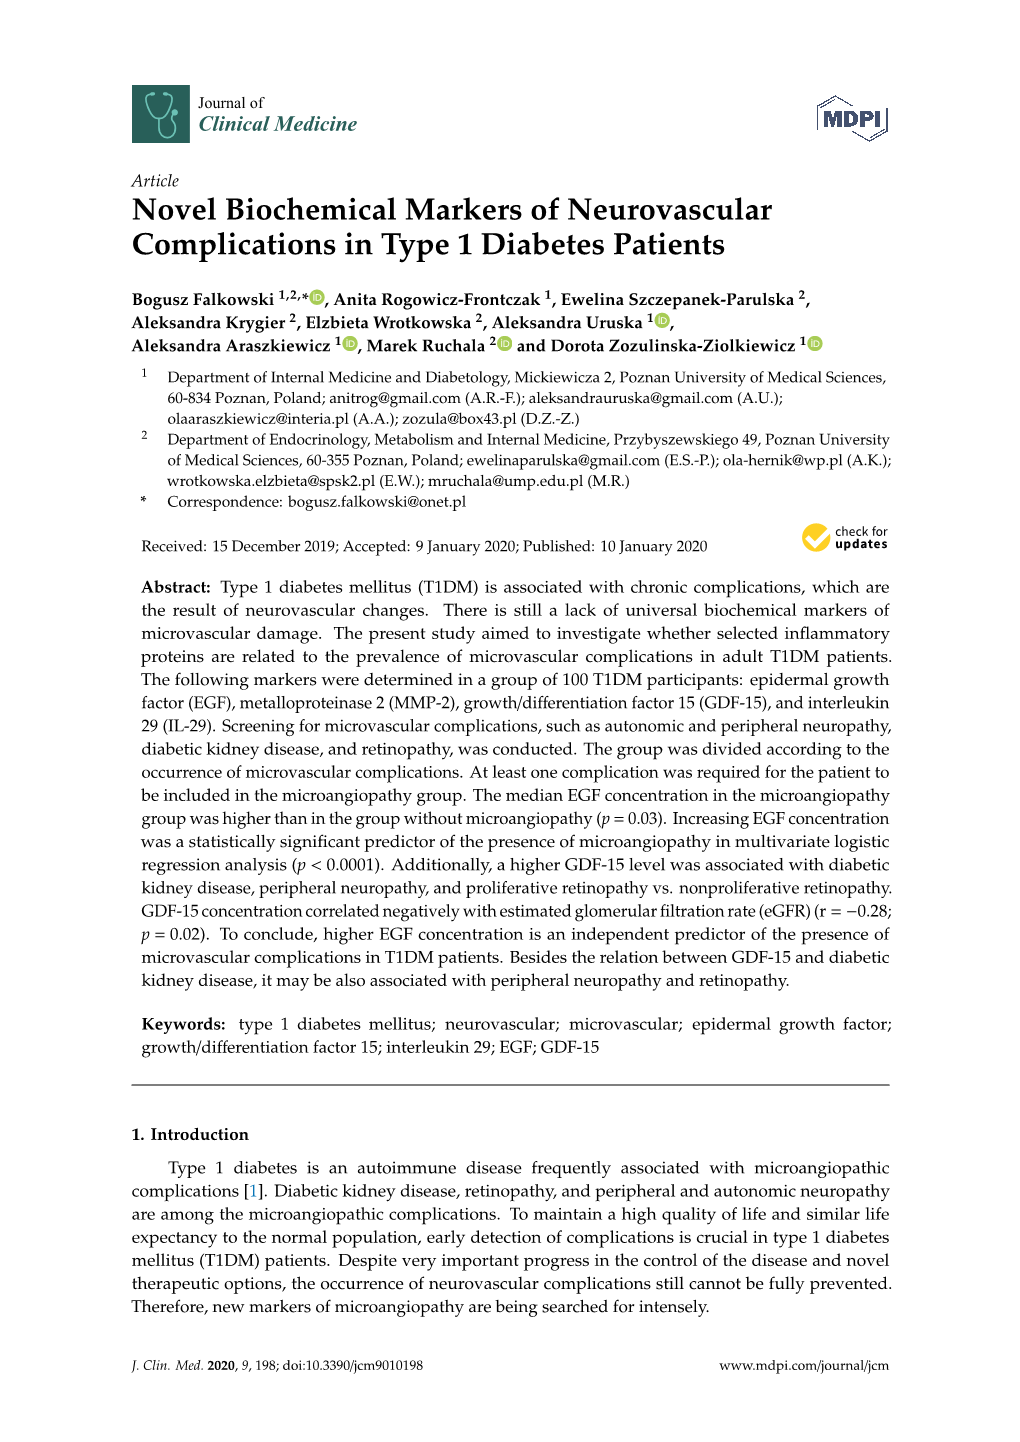 Novel Biochemical Markers of Neurovascular Complications in Type 1 Diabetes Patients